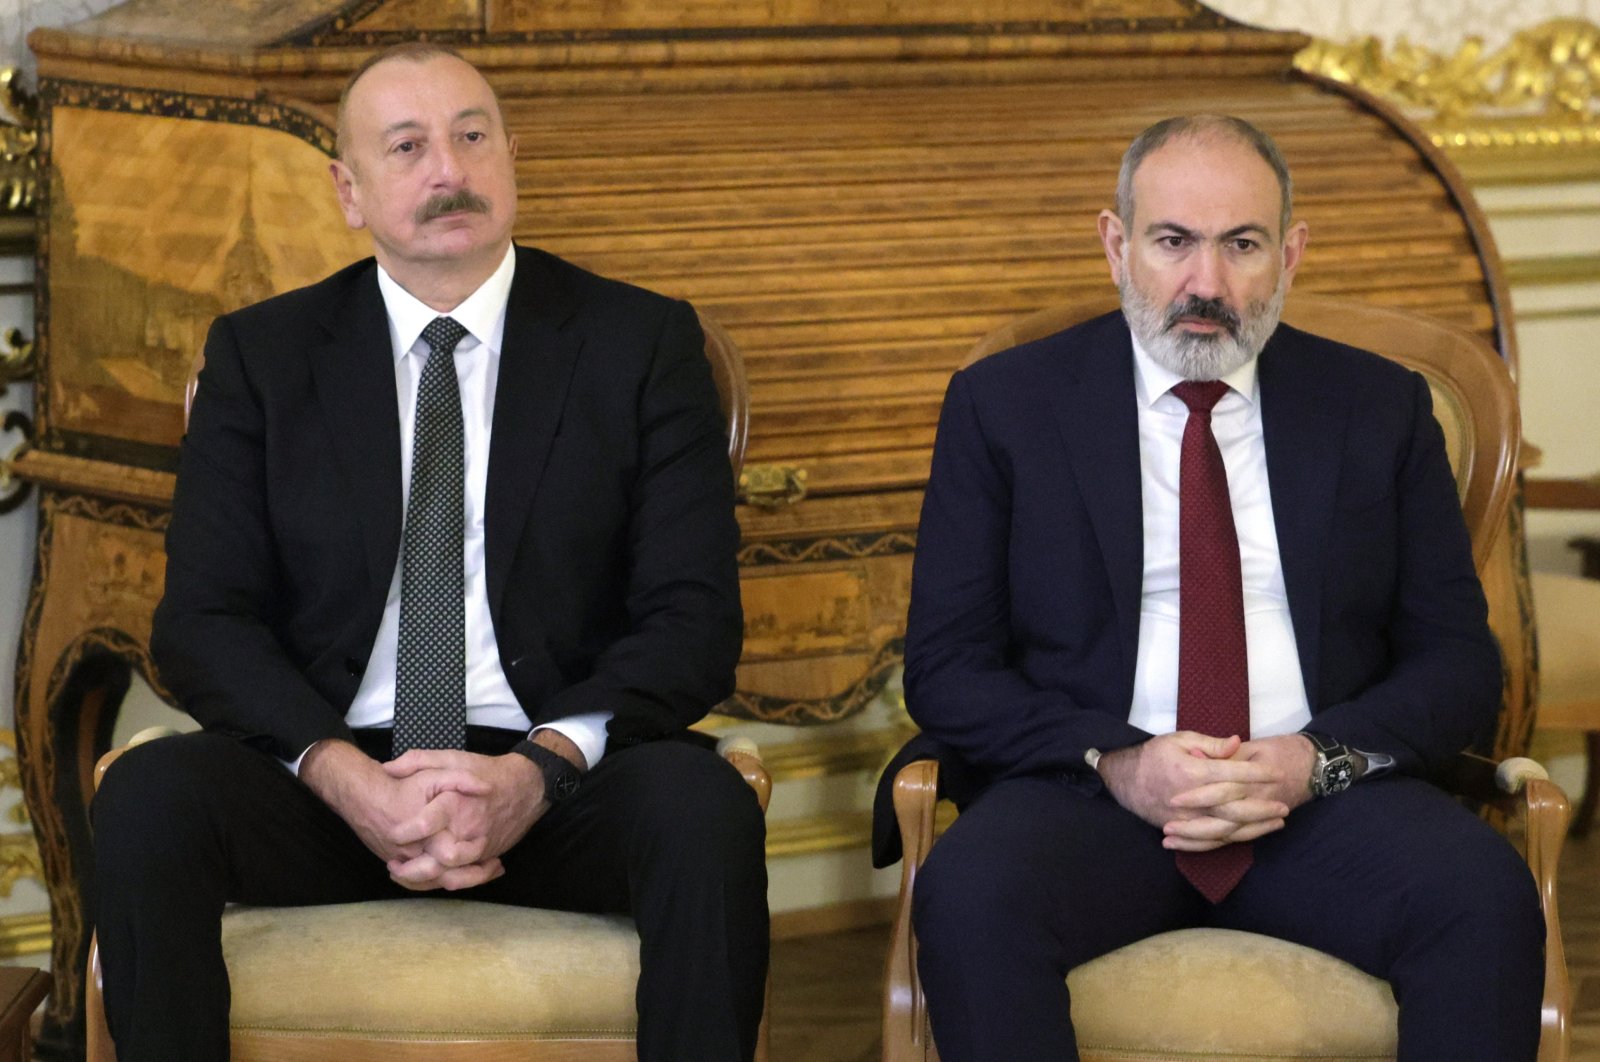 Azerbaijani President Ilham Aliyev (L) and Armenian Prime Minister Nikol Pashinyan are seen during a visit to the Catherine Palace at the Tsarskoye Selo State Museum and Reserve in Pushkin, a town in St. Petersburg, Russia, Dec. 26, 2023. (EPA Photo)